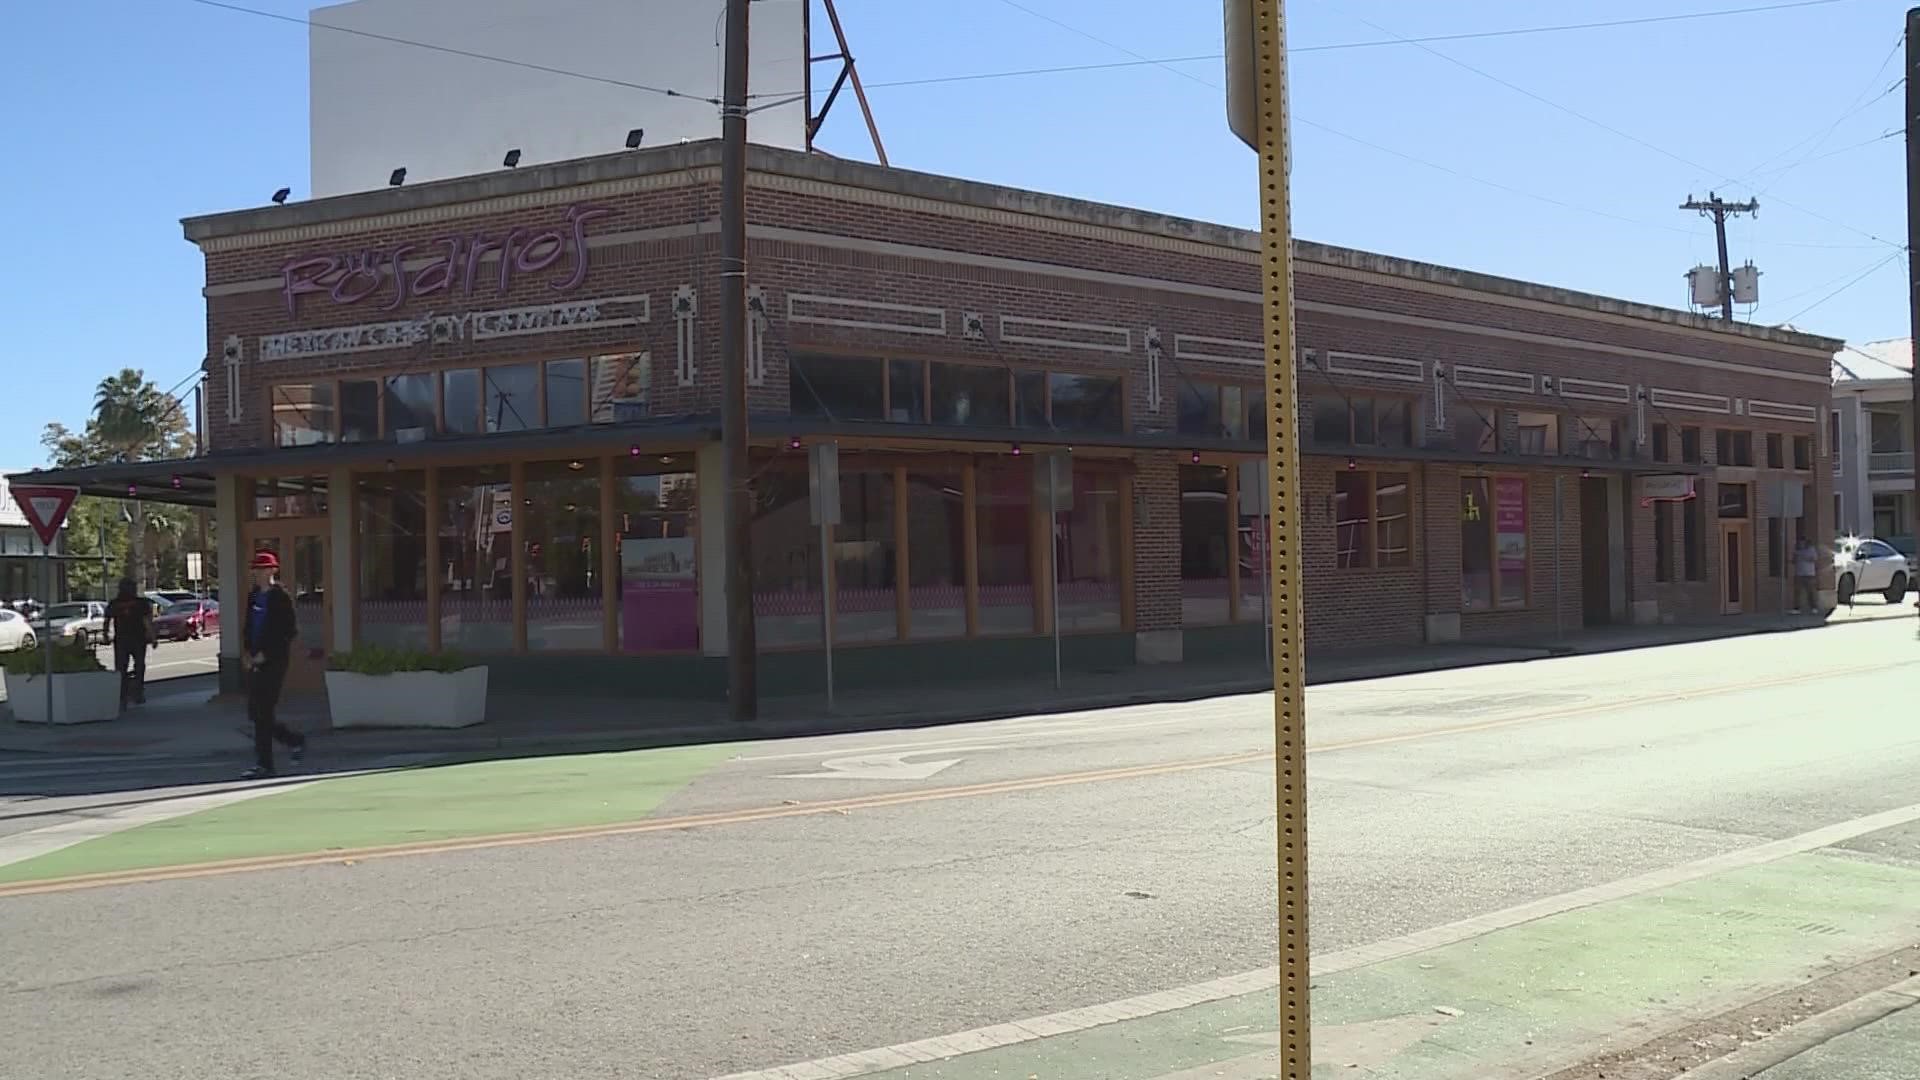 The downtown San Antonio mainstay has been in this location for more than two decades, but they'll be opening a new location down the block.